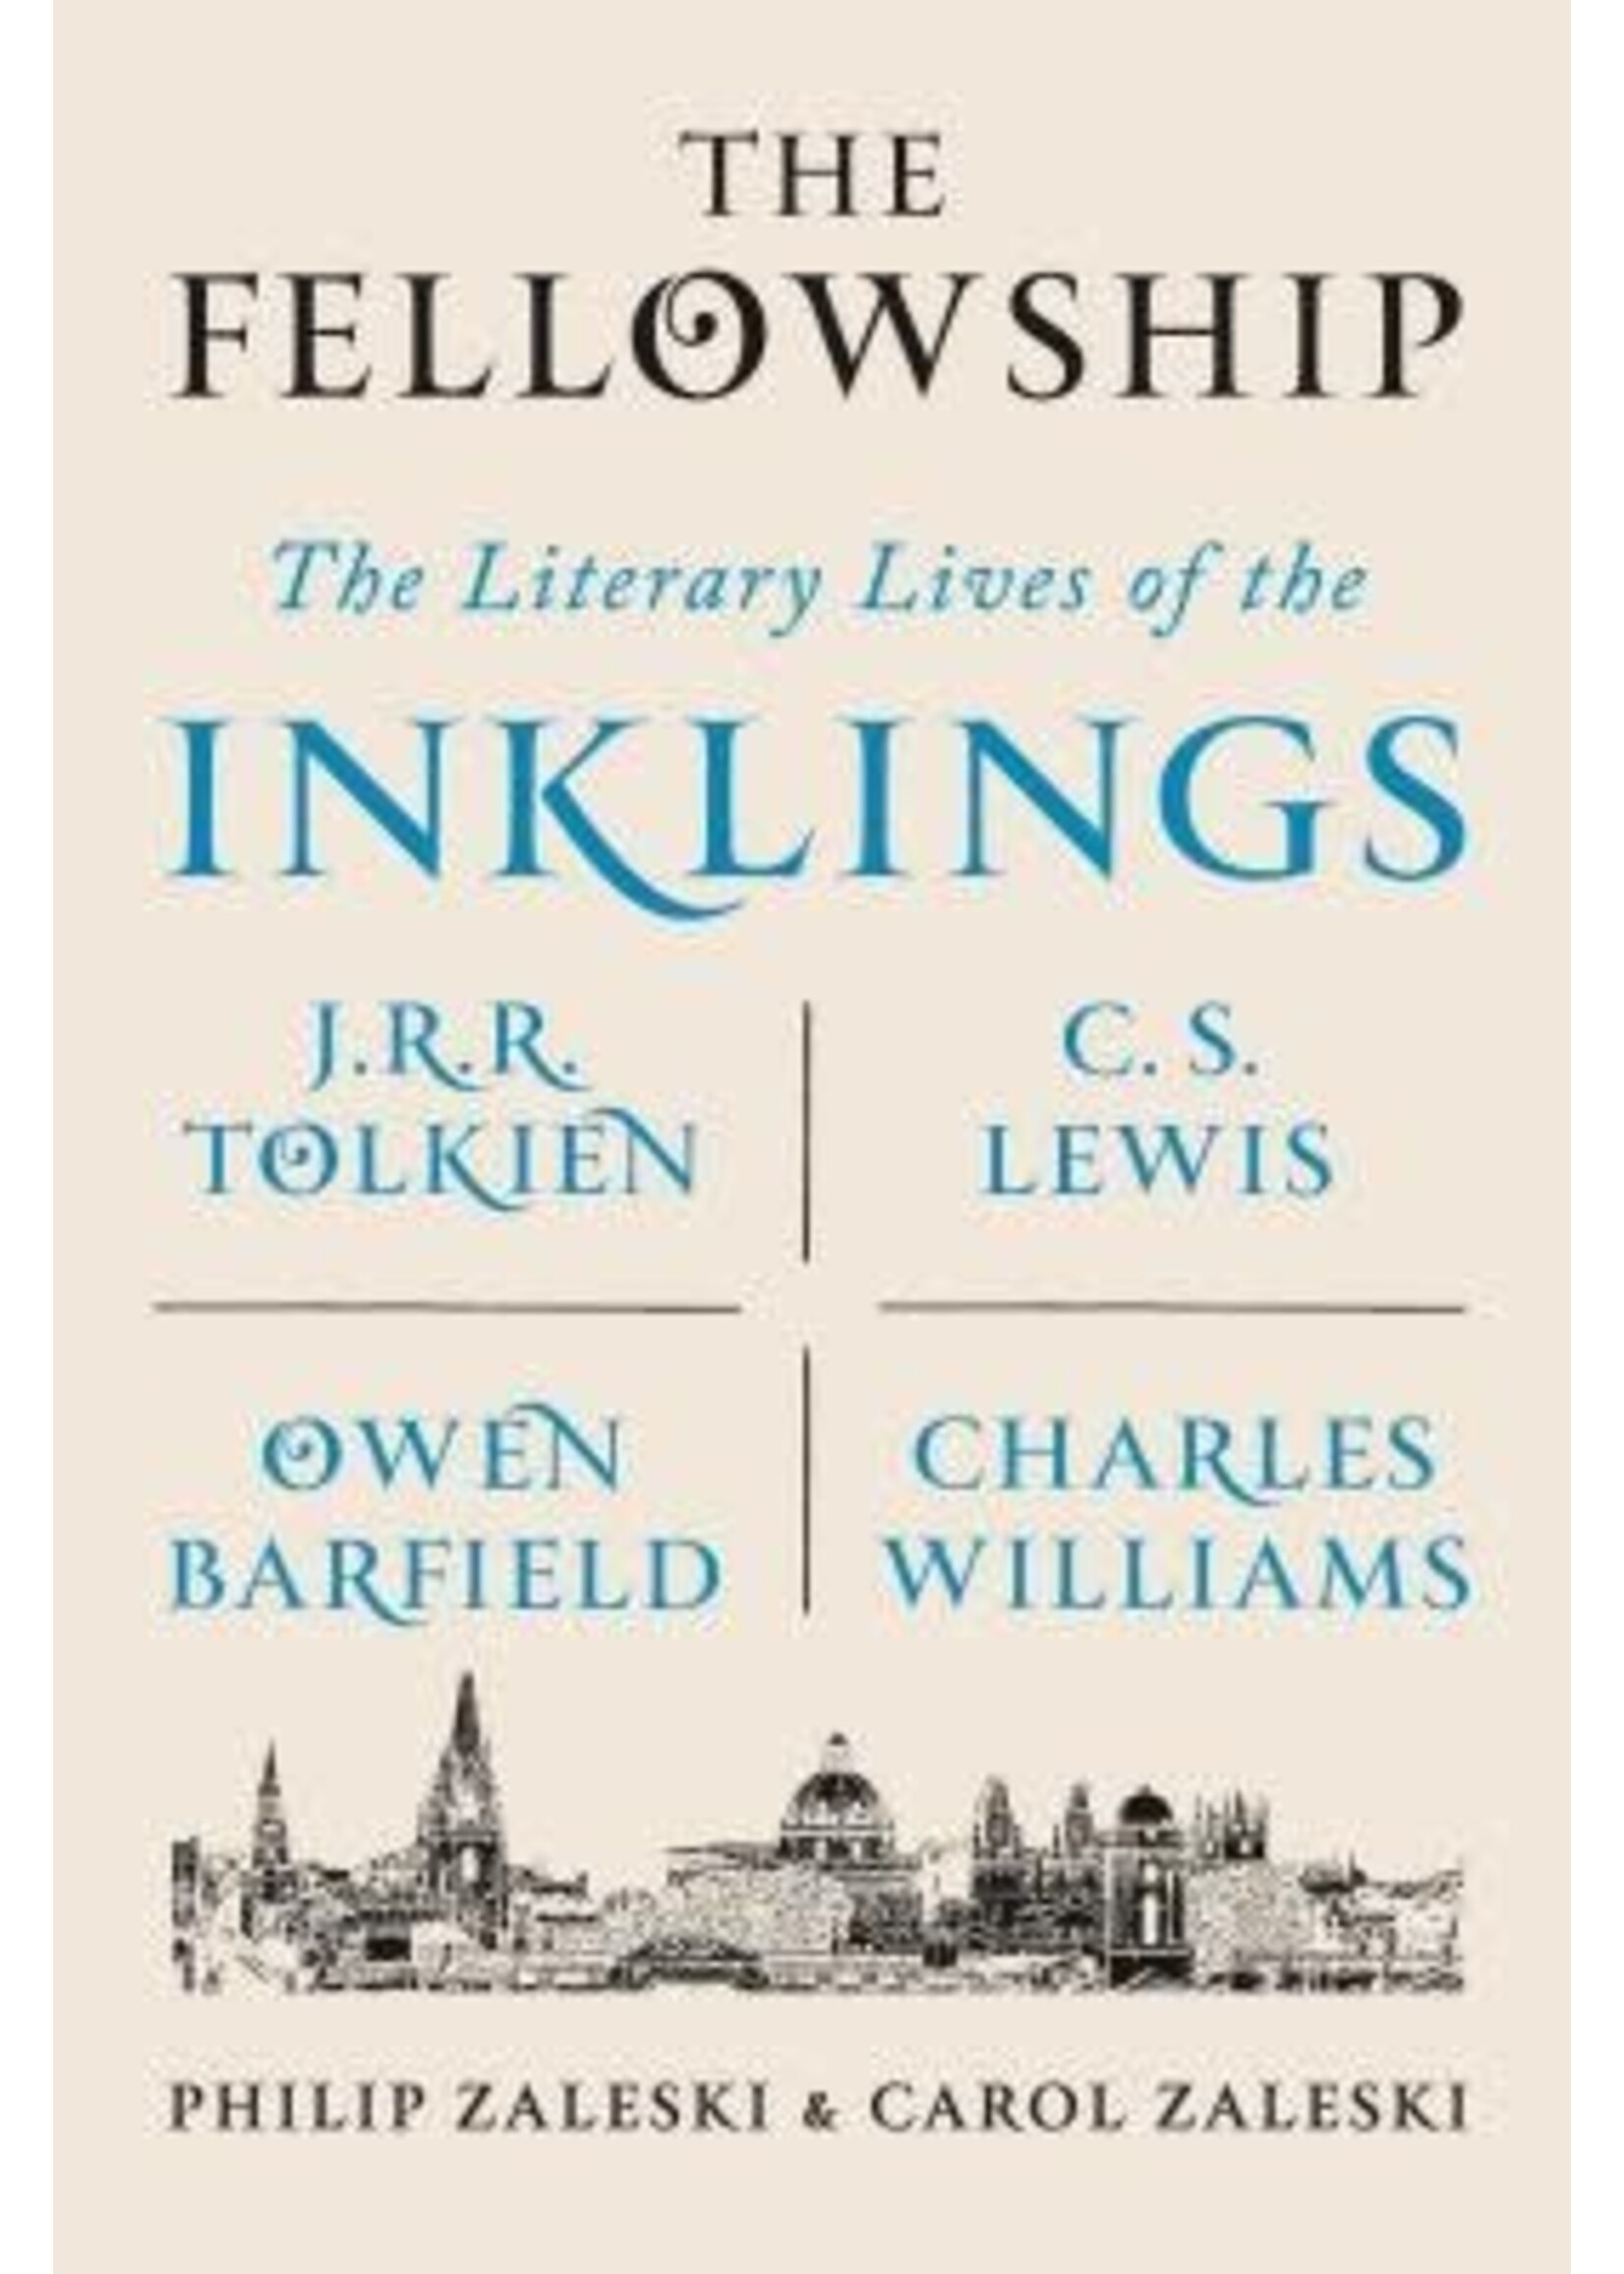 The Fellowship The Literary Lives of the Inklings: J.R.R. Tolkien, C. S. Lewis, Owen Barfield, Charles Williams by Philip Zaleski, Carol Zaleski